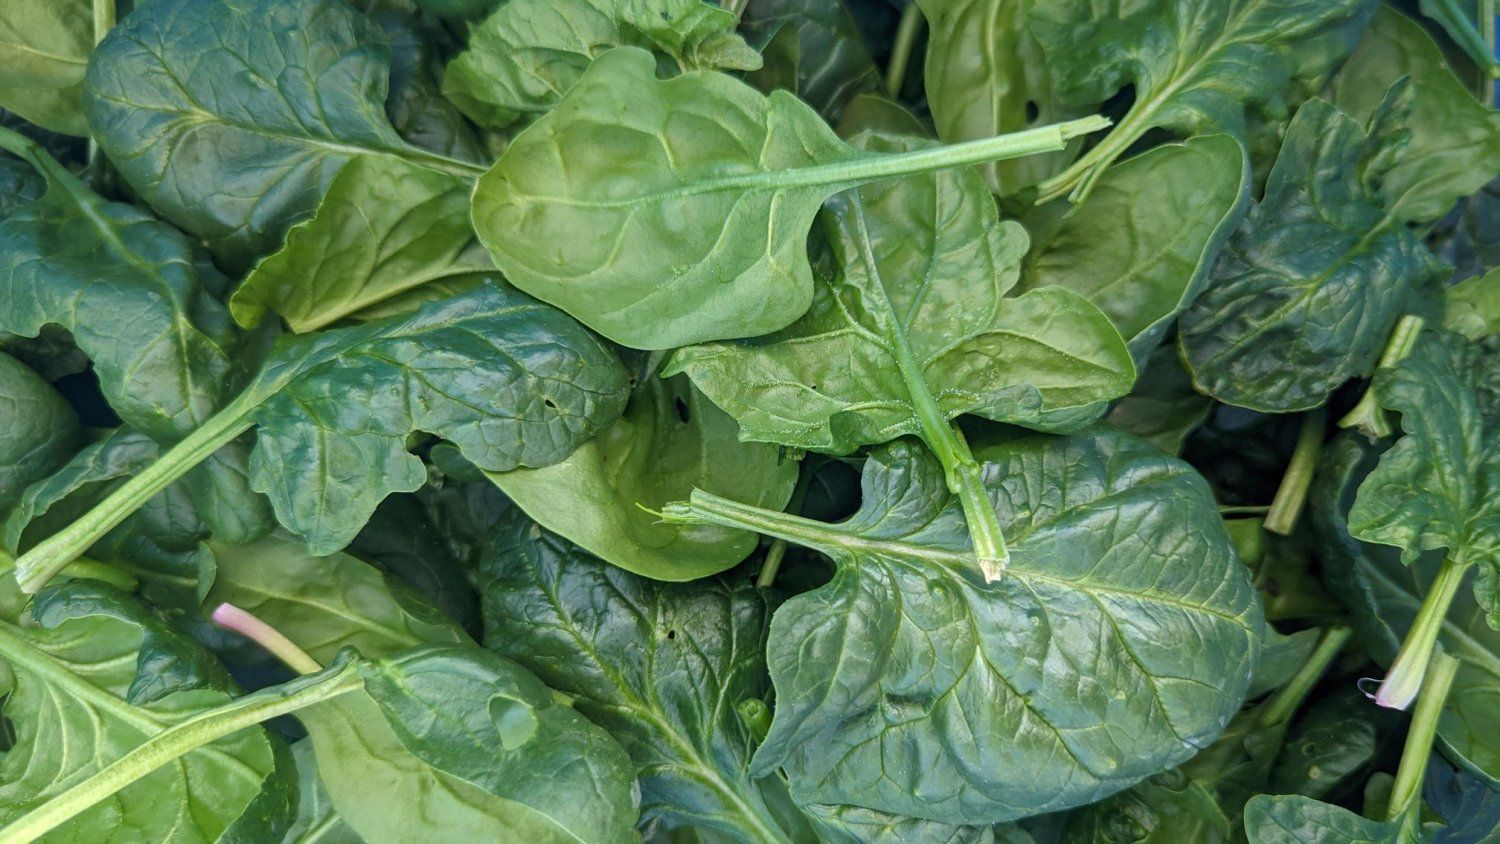 SPINACH SALE! Order by Wednesday at midnight, pick up Thursday, February 29th.